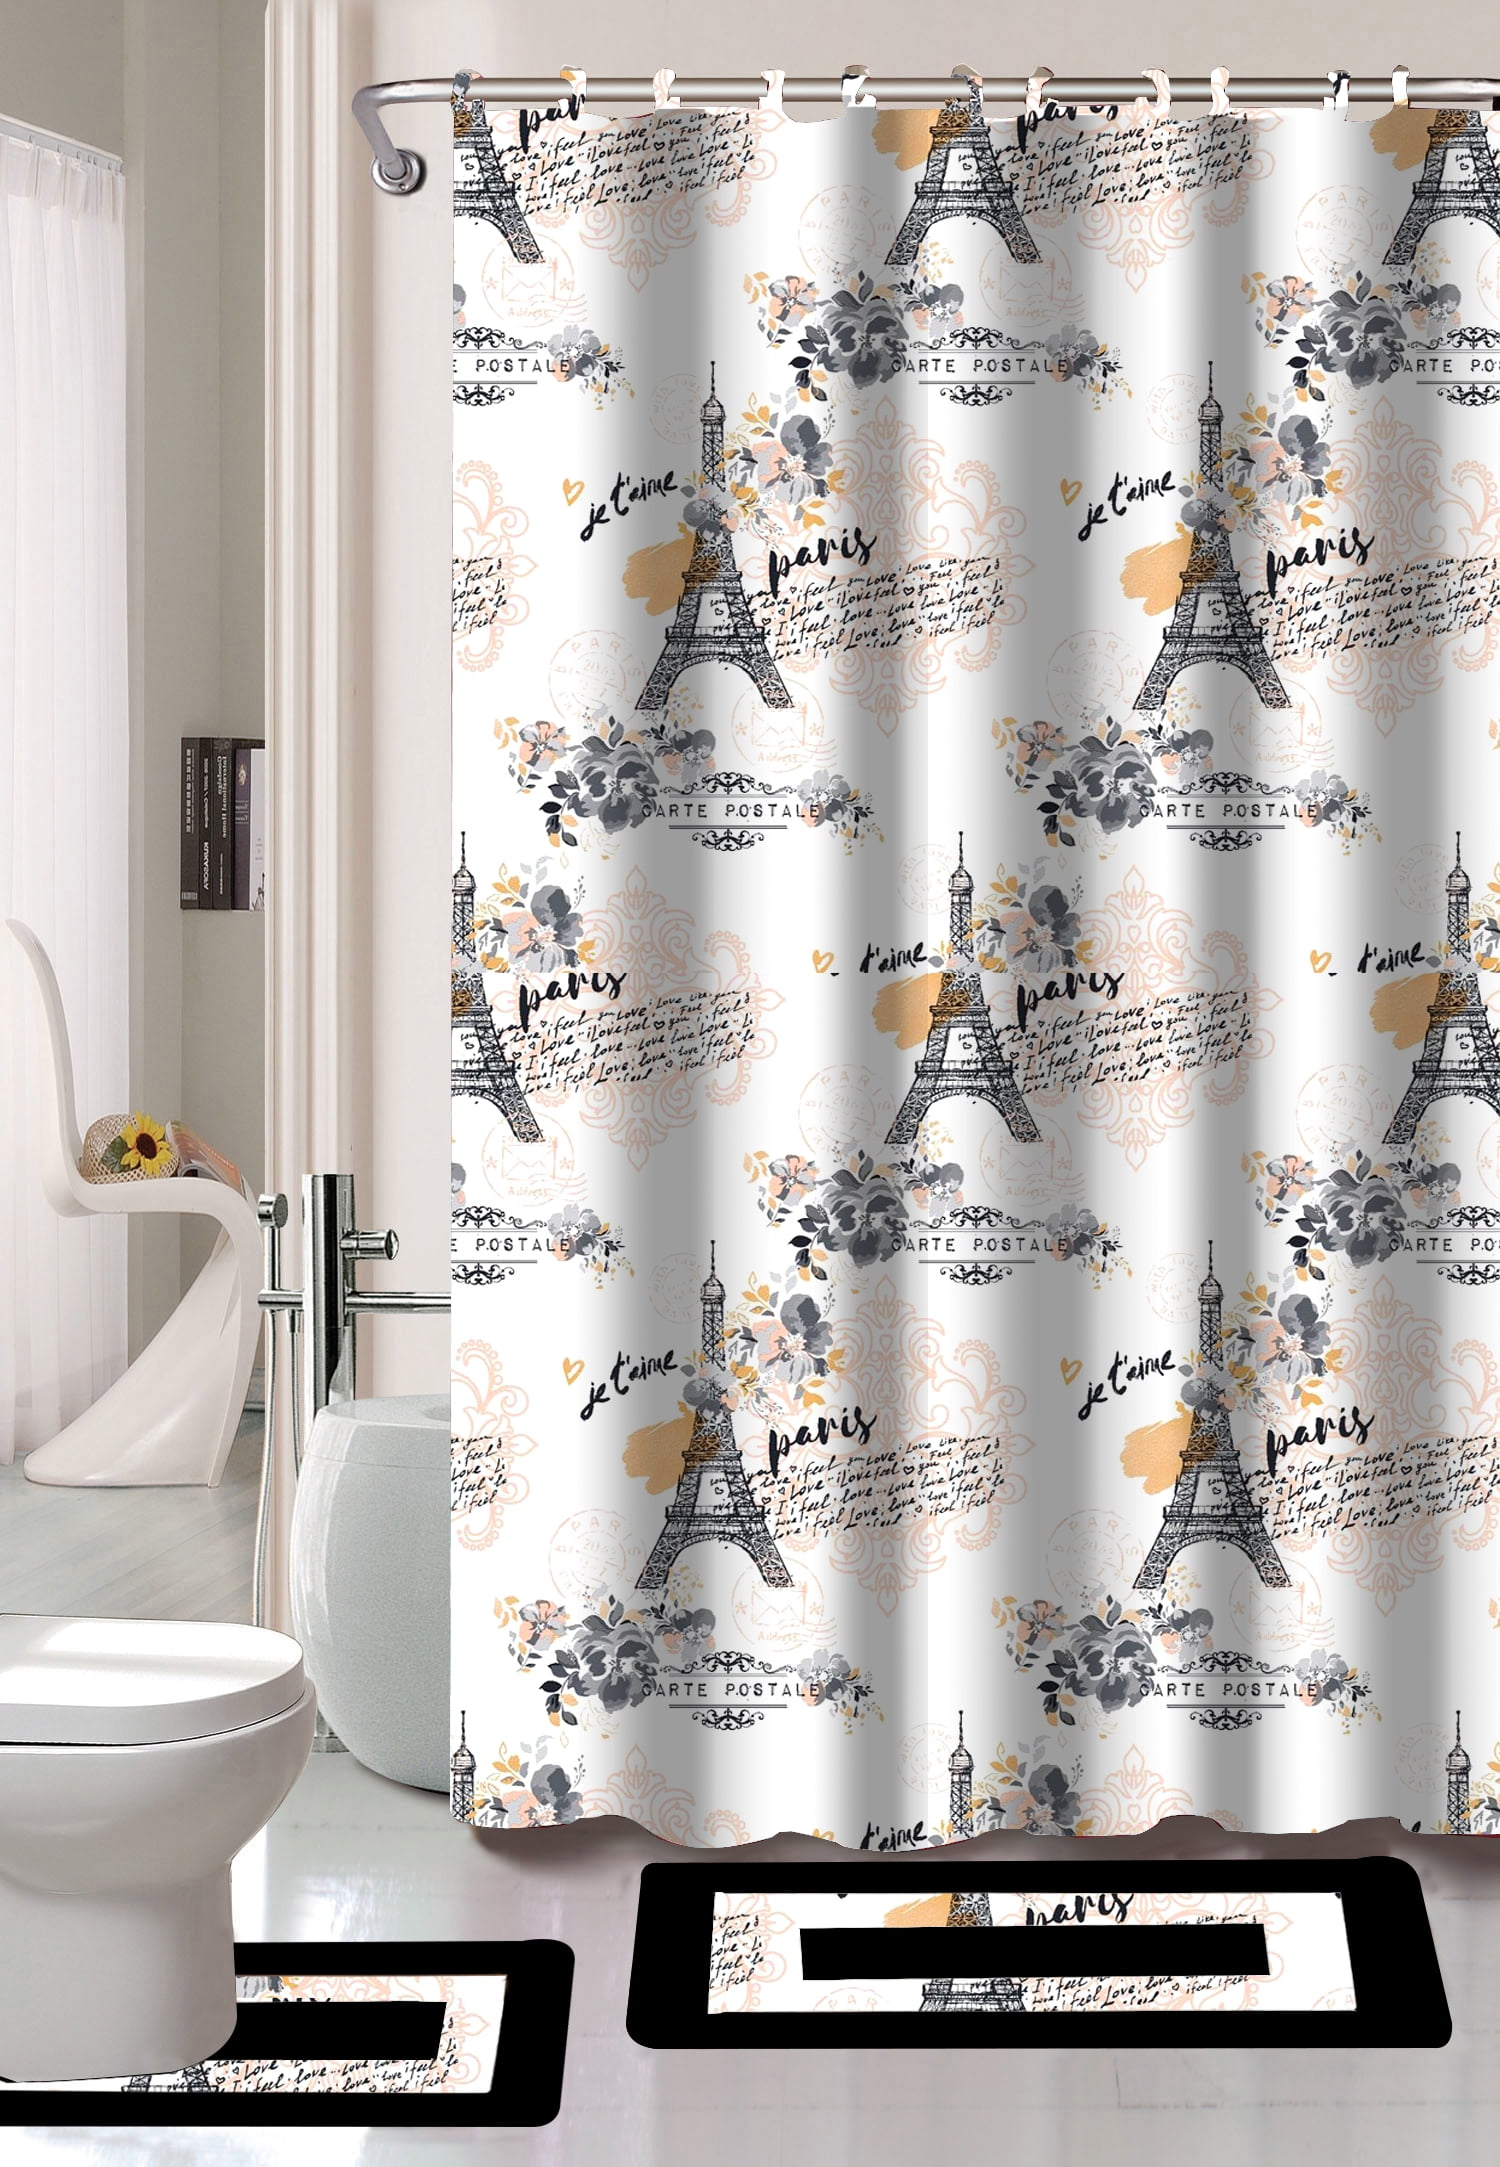 The Bicycle  Theme  Waterproof  Home Decor Shower Curtain Bathroom Mat 